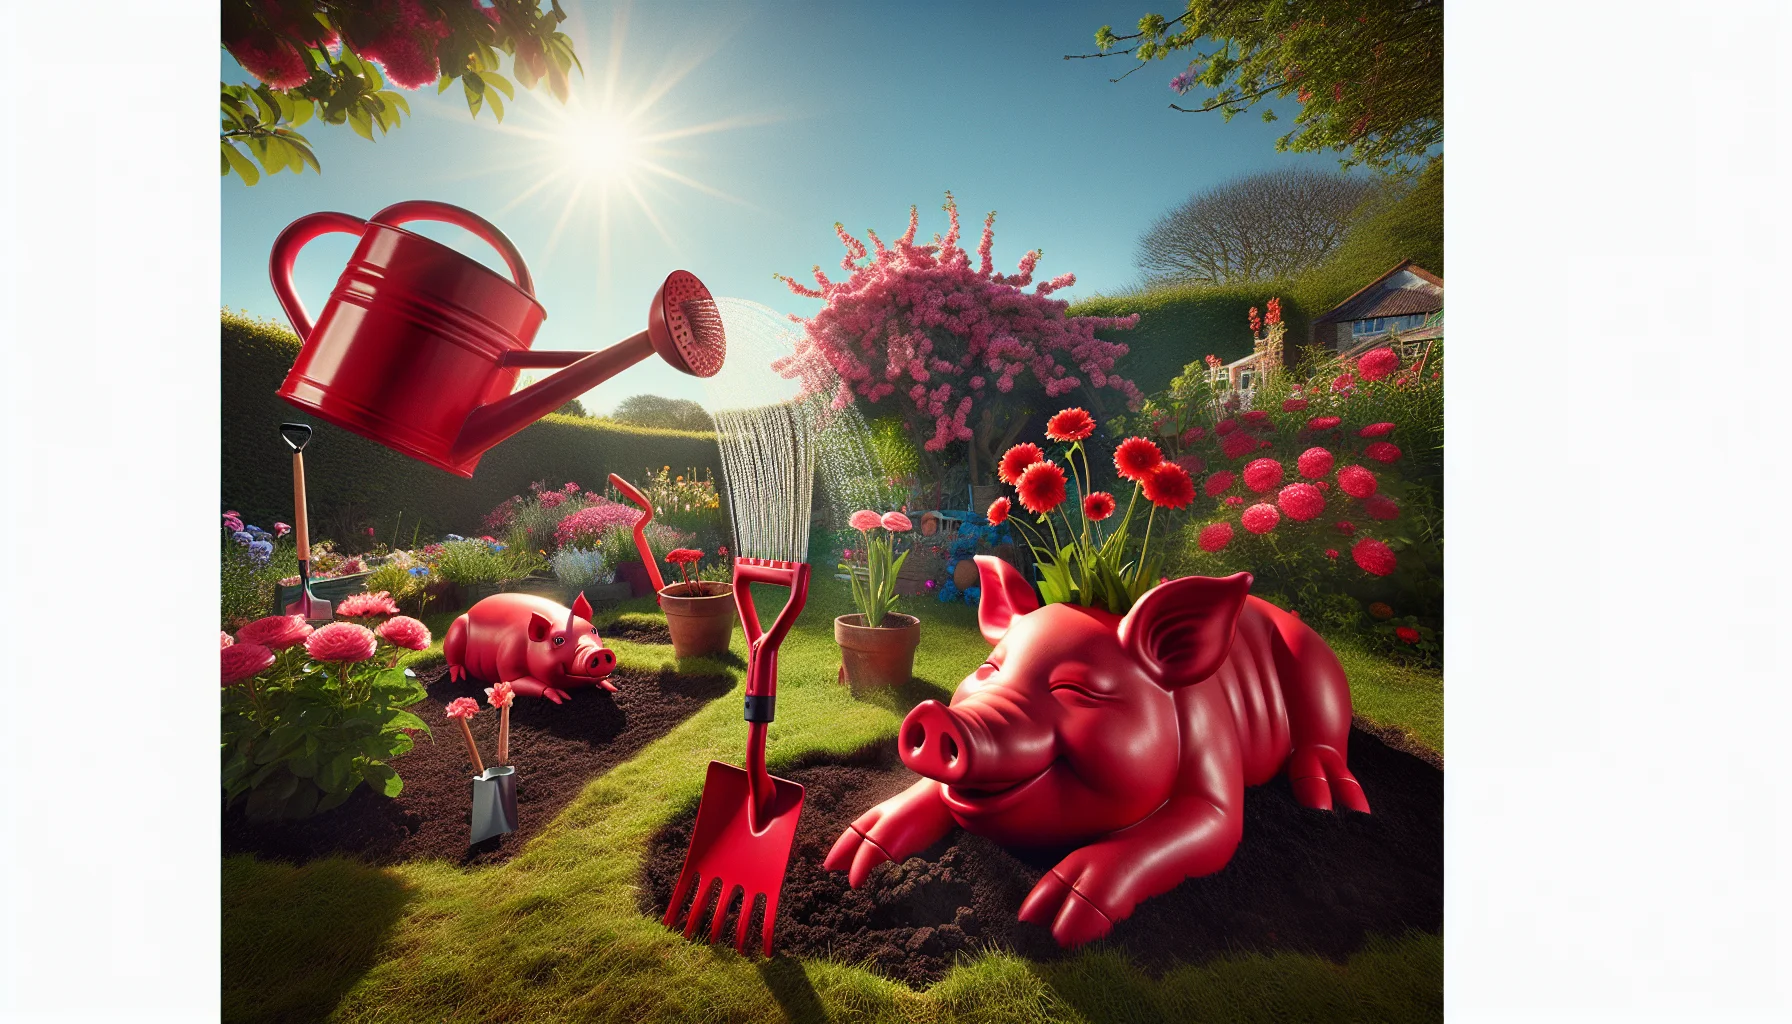 Imagine a comical scene in a blooming garden under a sunny sky, where garden tools have been hilariously repurposed. Picture a vibrant red pig-shaped watering can showering flowers, its snout serving as the spout. Nearby, a red pig-shaped trowel is 'digging' into the soil, evoking laughter due to its absurd but creative use. Another tool, a rake designed like a lounging red pig, seems to be 'combing' through the grass. This picturesque and humorous tableau serves to pique interest in gardening and bring joy to the observer, highlighting how everyday objects can inject fun into routine tasks.